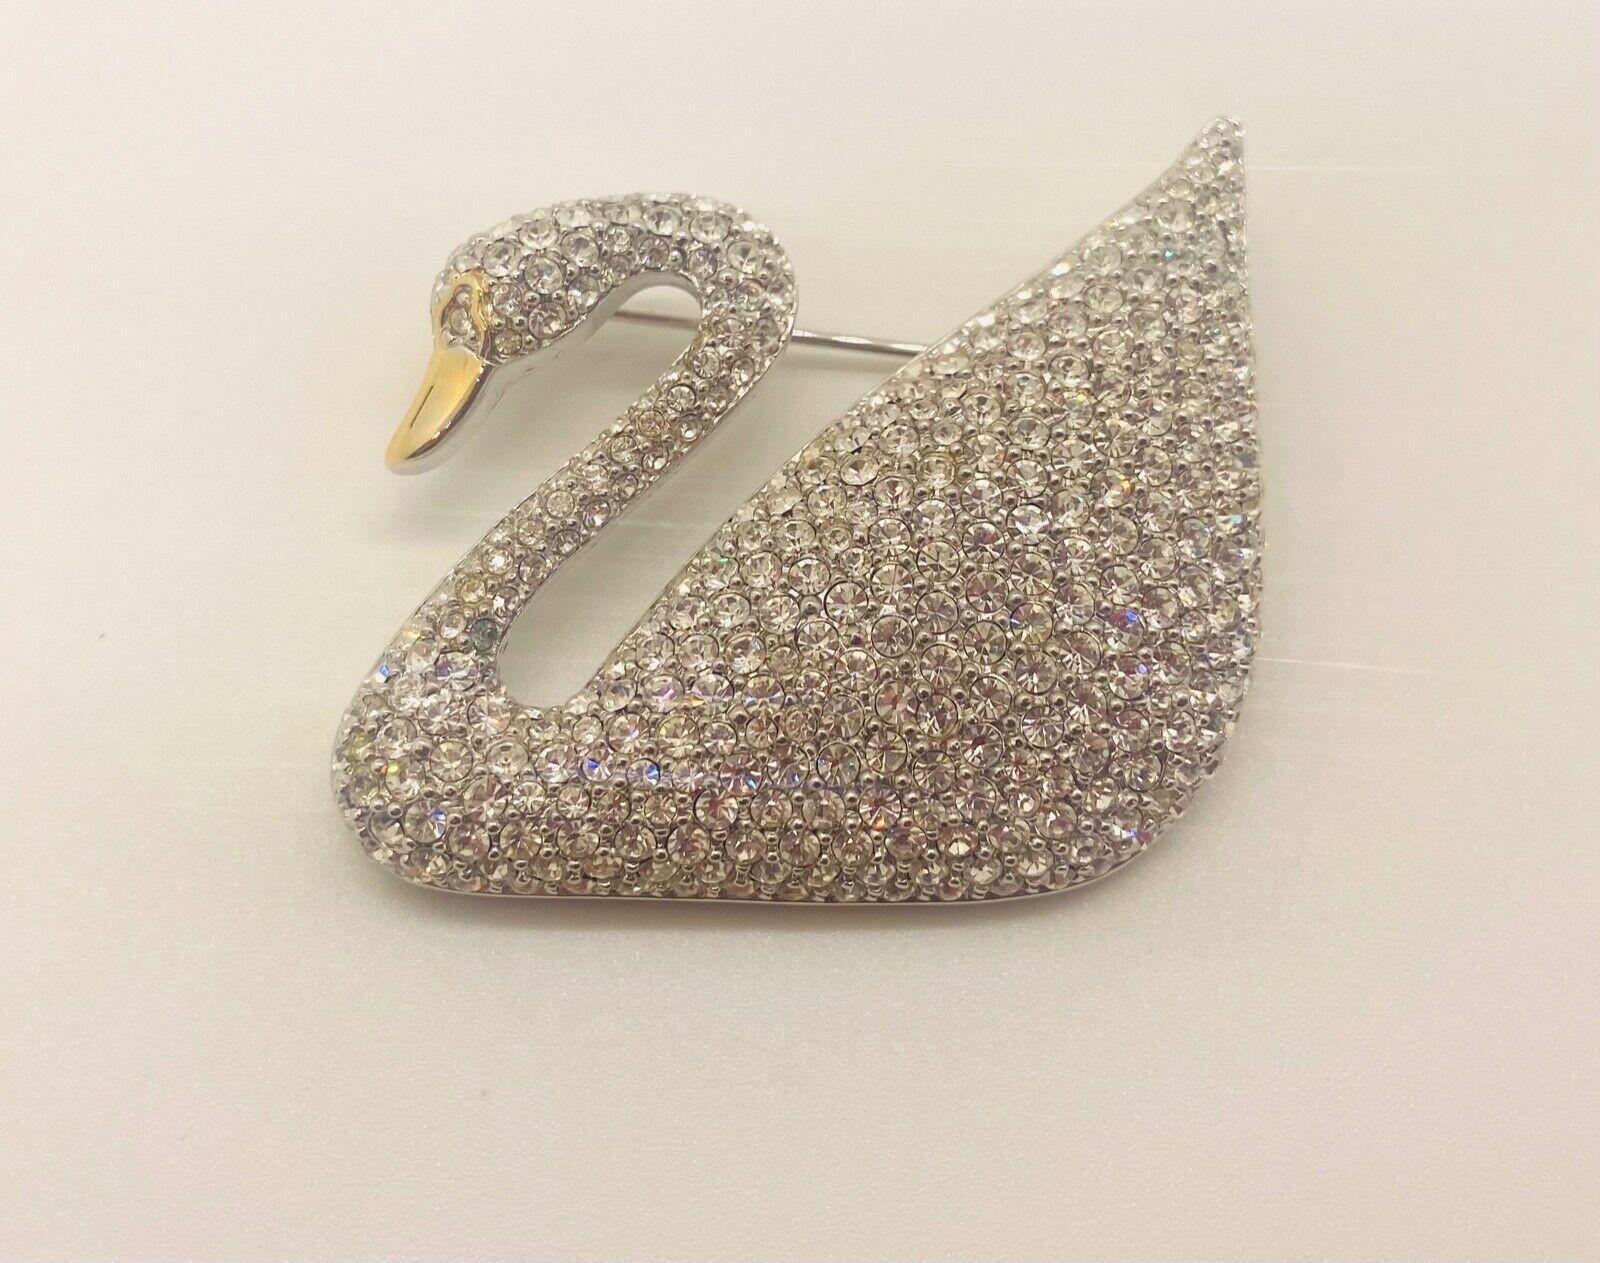 A beautiful authentic Swarovski Swan shaped brooch or pin engraved with the Swarovski logo and 1895-1995. 
The silver tone pin/ brooch is entirely done with clear colored paddle small crystals and looks and is finely handcrafted. The brooch comes